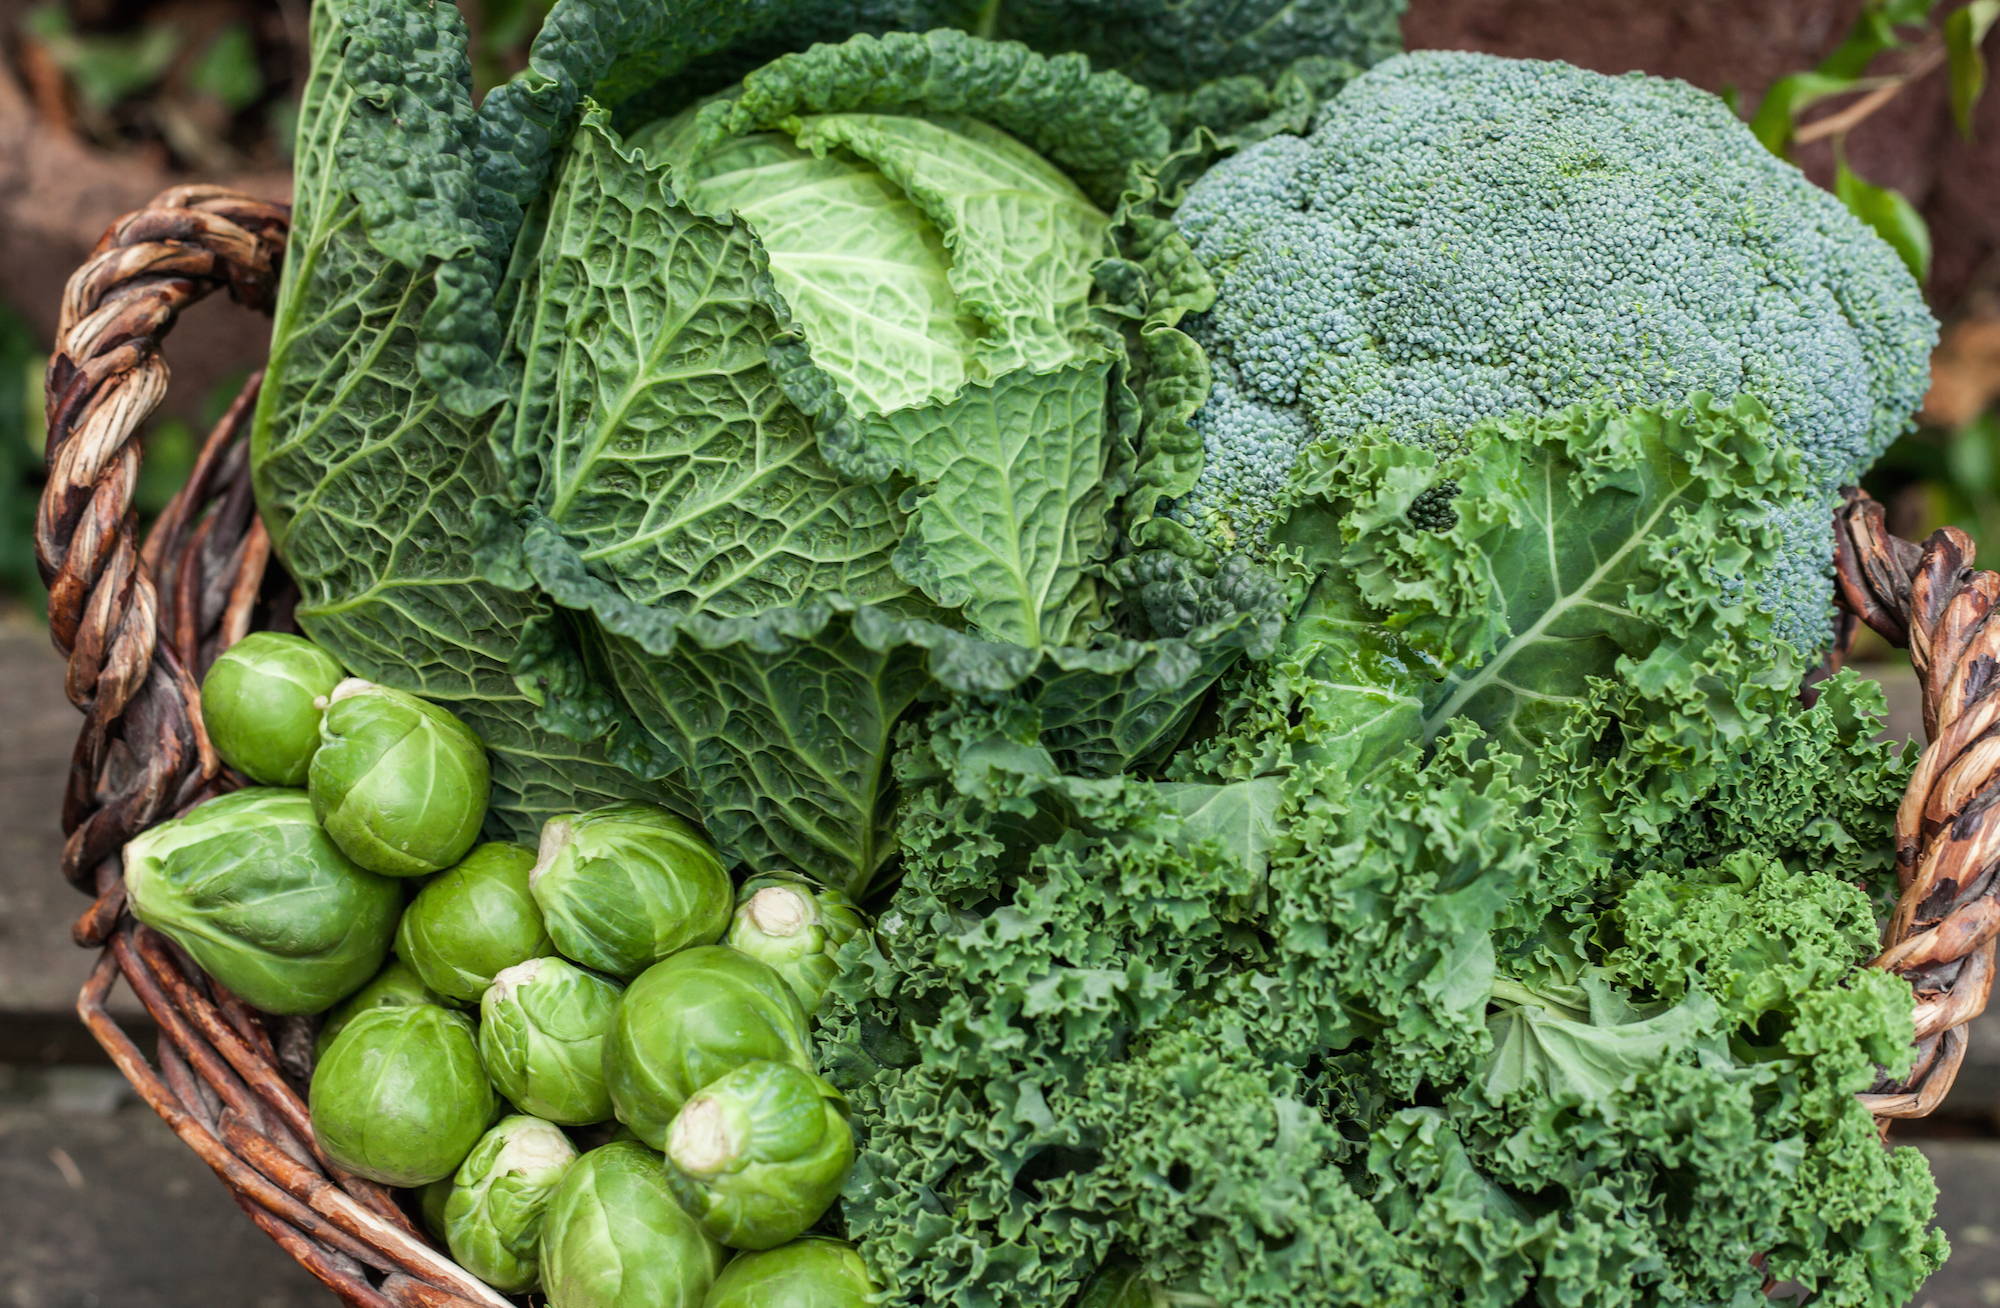 Green veg should be cooked when supporting thyroid problems